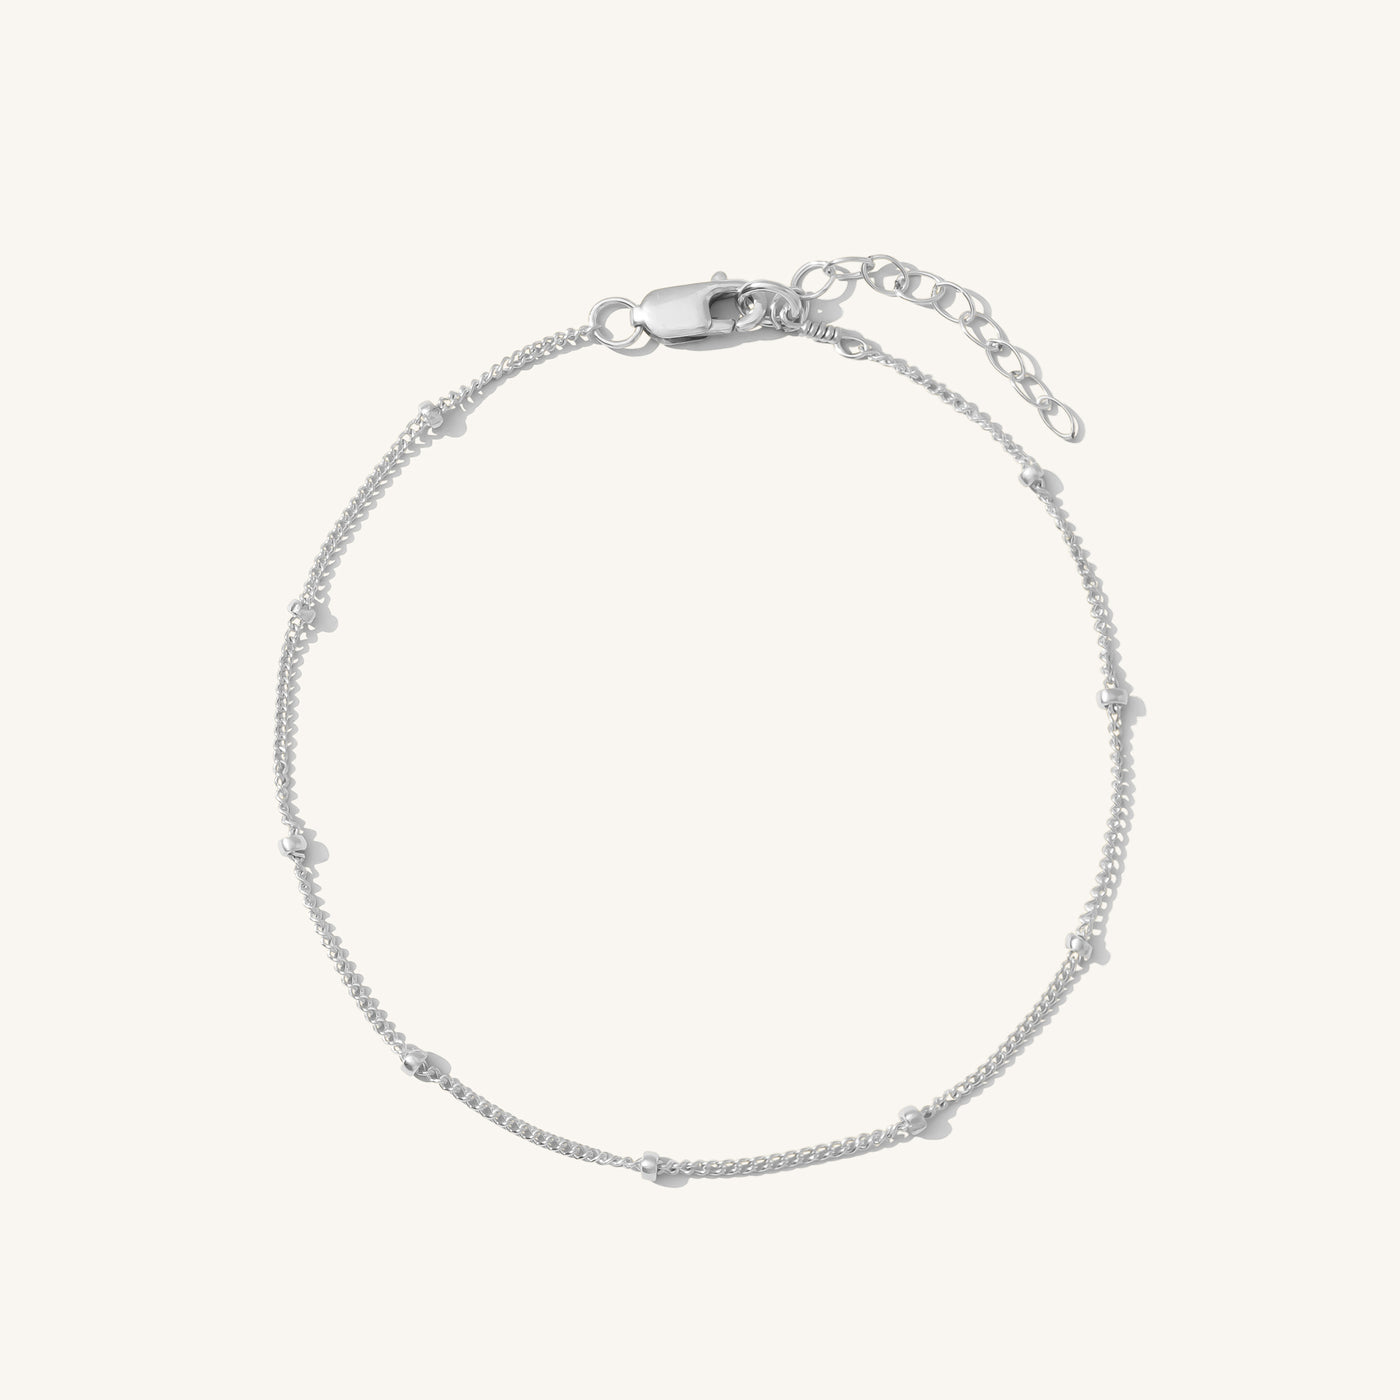 Dainty Satellite Chain Anklet | Simple & Dainty Jewelry